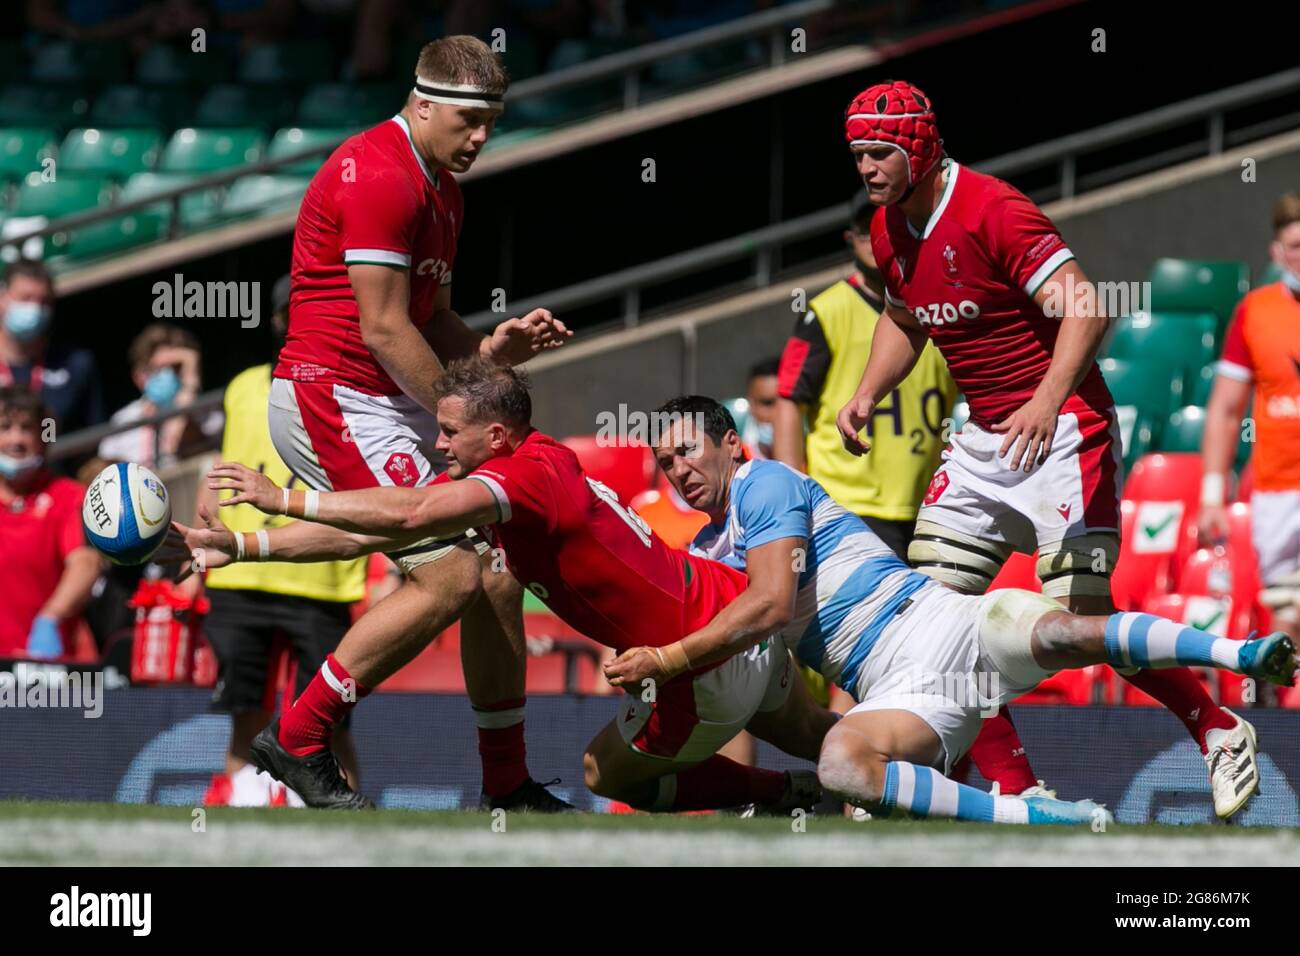 Cardiff, UK. 17th July, 2021. Cardiff, UK. July 17th : Nick Tompkins (Wales) controls the ball during the 2021 Summer Internationals match between Wales and Argentina at Principality Stadium. Credit: Federico Guerra Morán/Alamy Live News Stock Photo